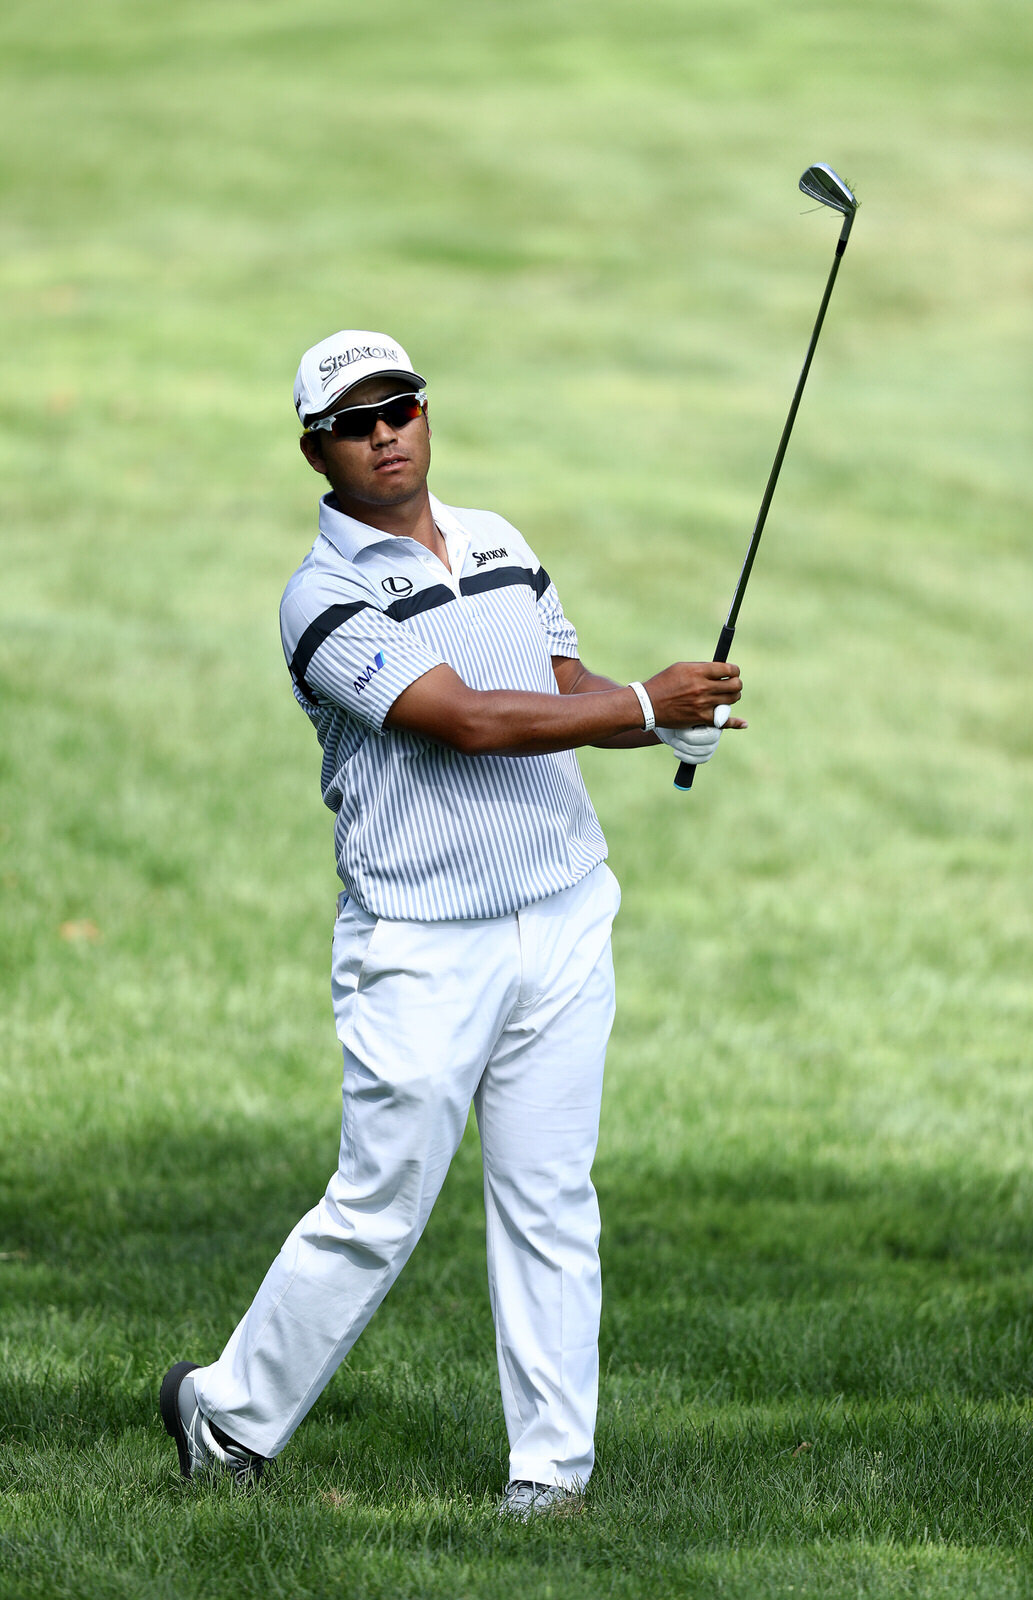  DUBLIN, OHIO - JULY 17: Hideki Matsuyama of Japan plays his second shot on the 15th hole during the second round of The Memorial Tournament on July 17, 2020 at Muirfield Village Golf Club in Dublin, Ohio. (Photo by Jamie Squire/Getty Images) 